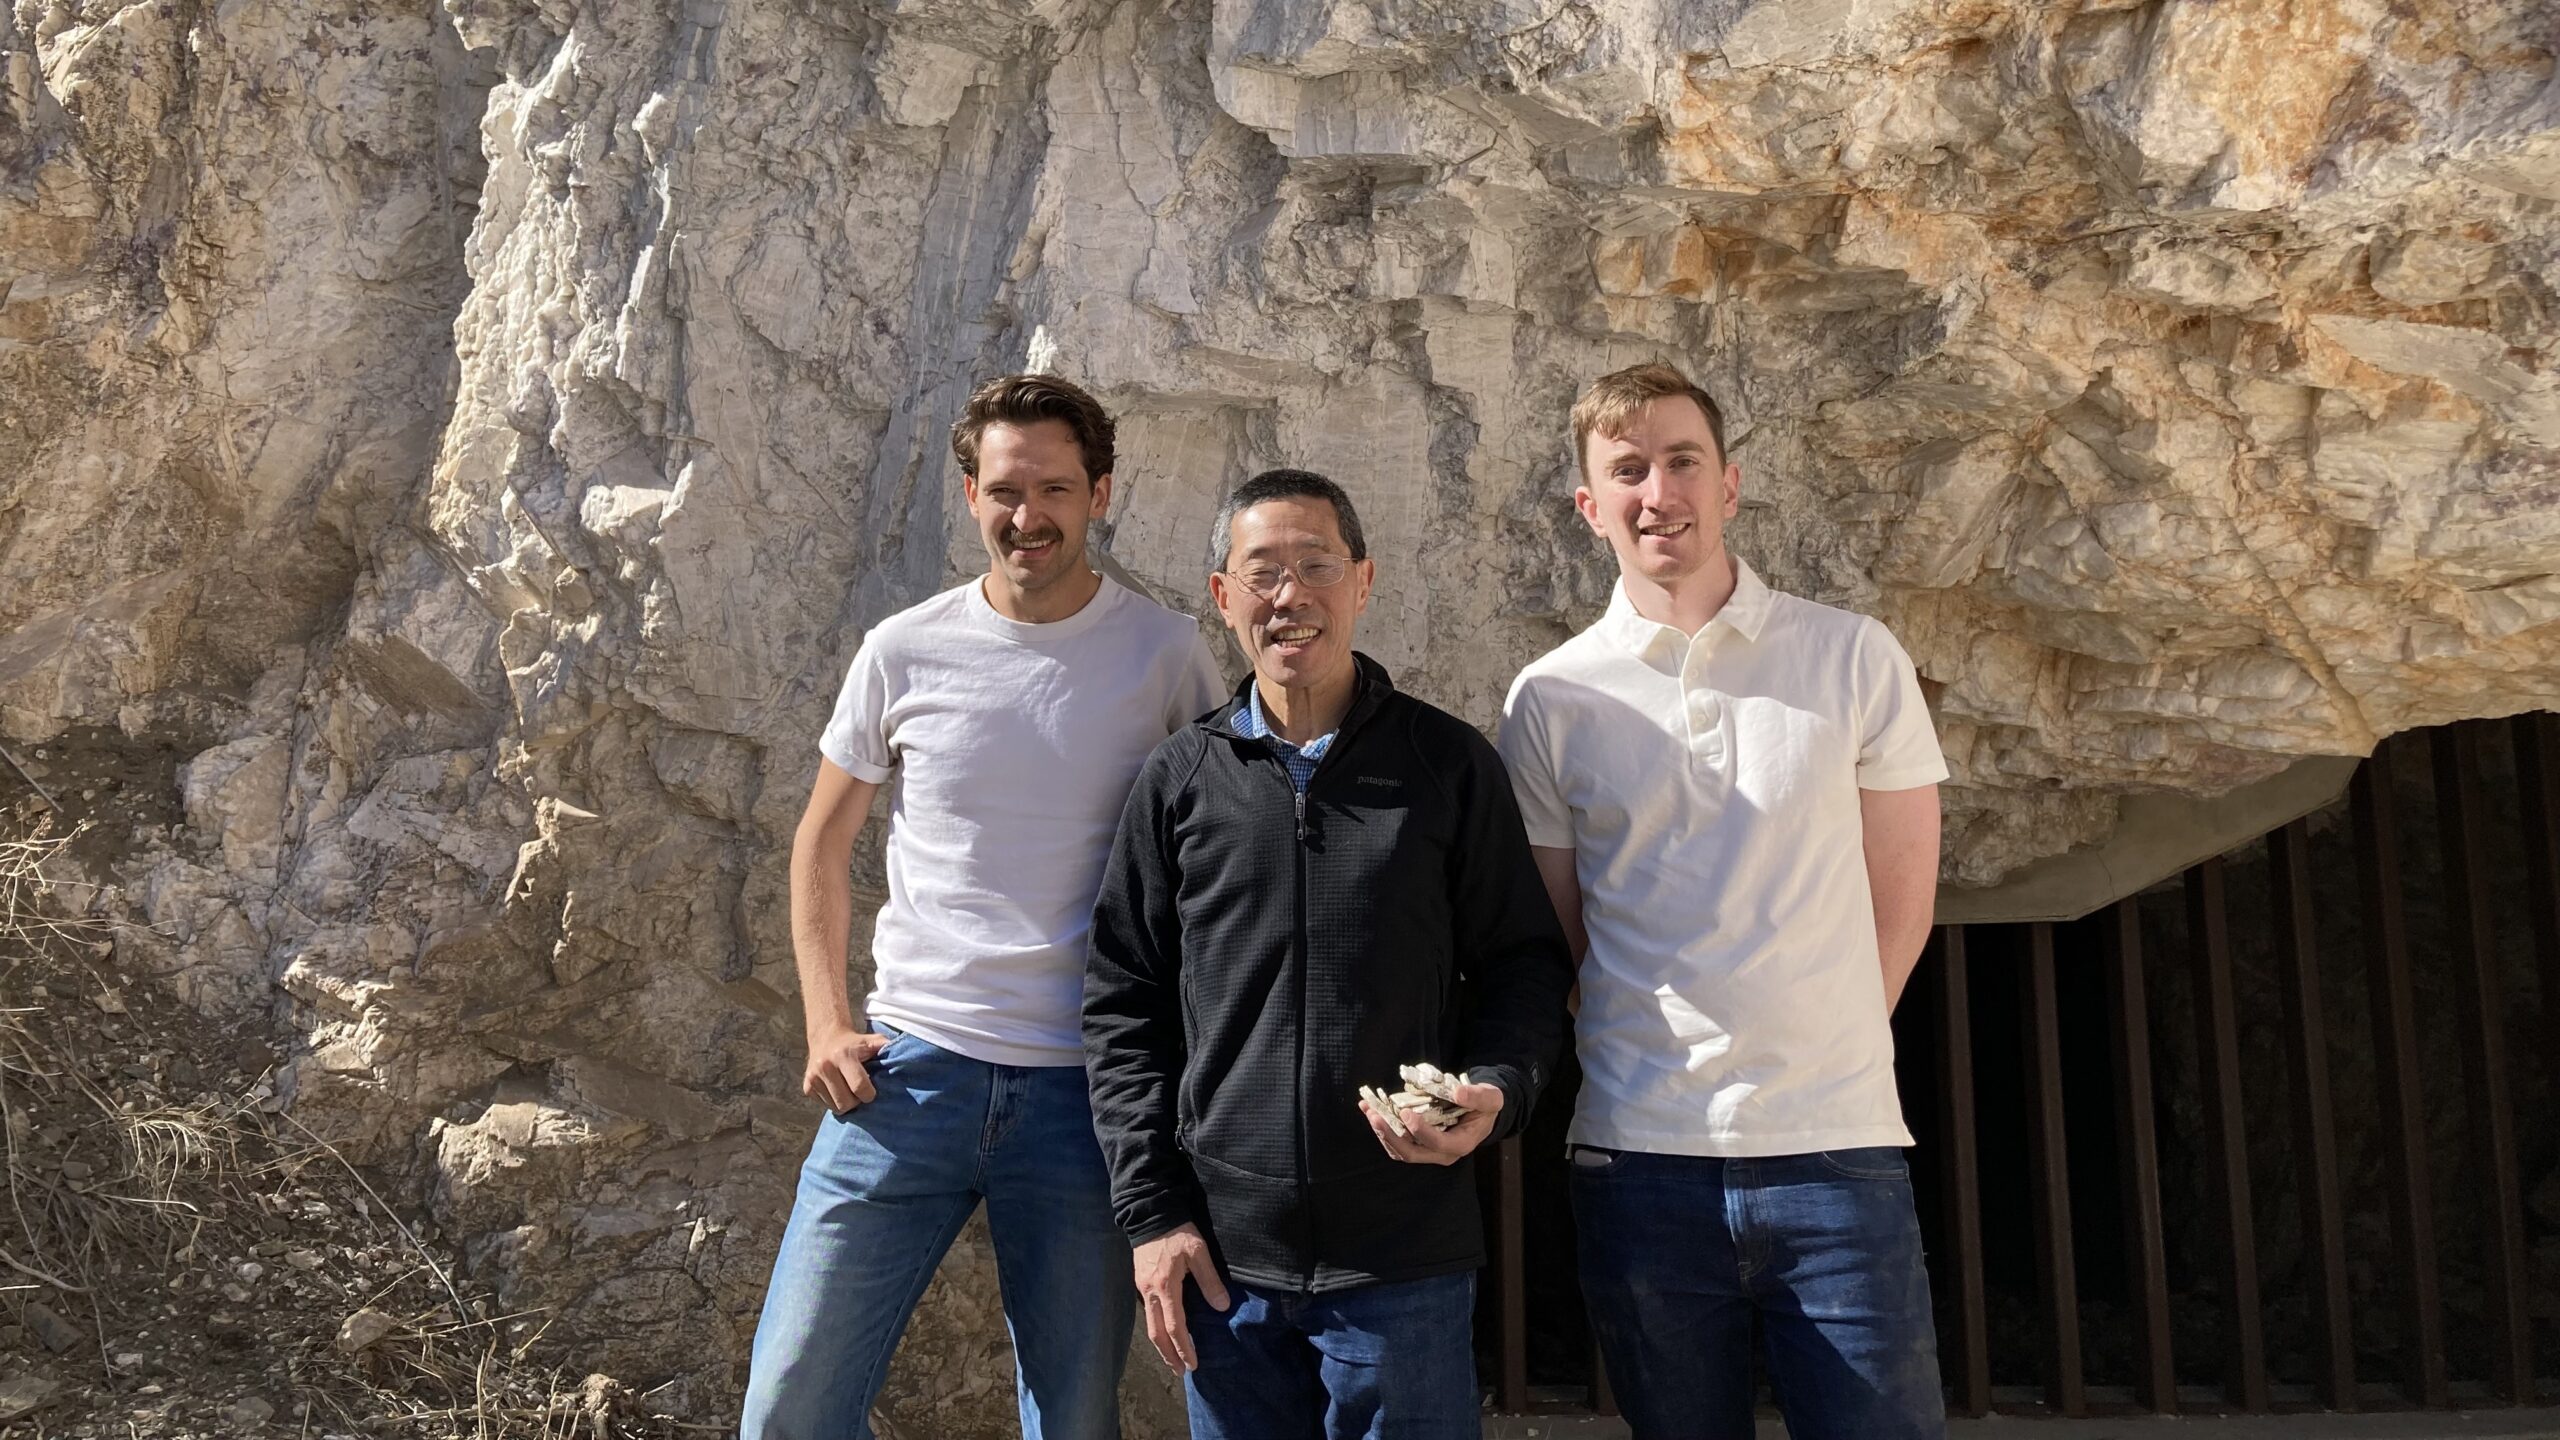 Three men stand in front of a sheer rock face.